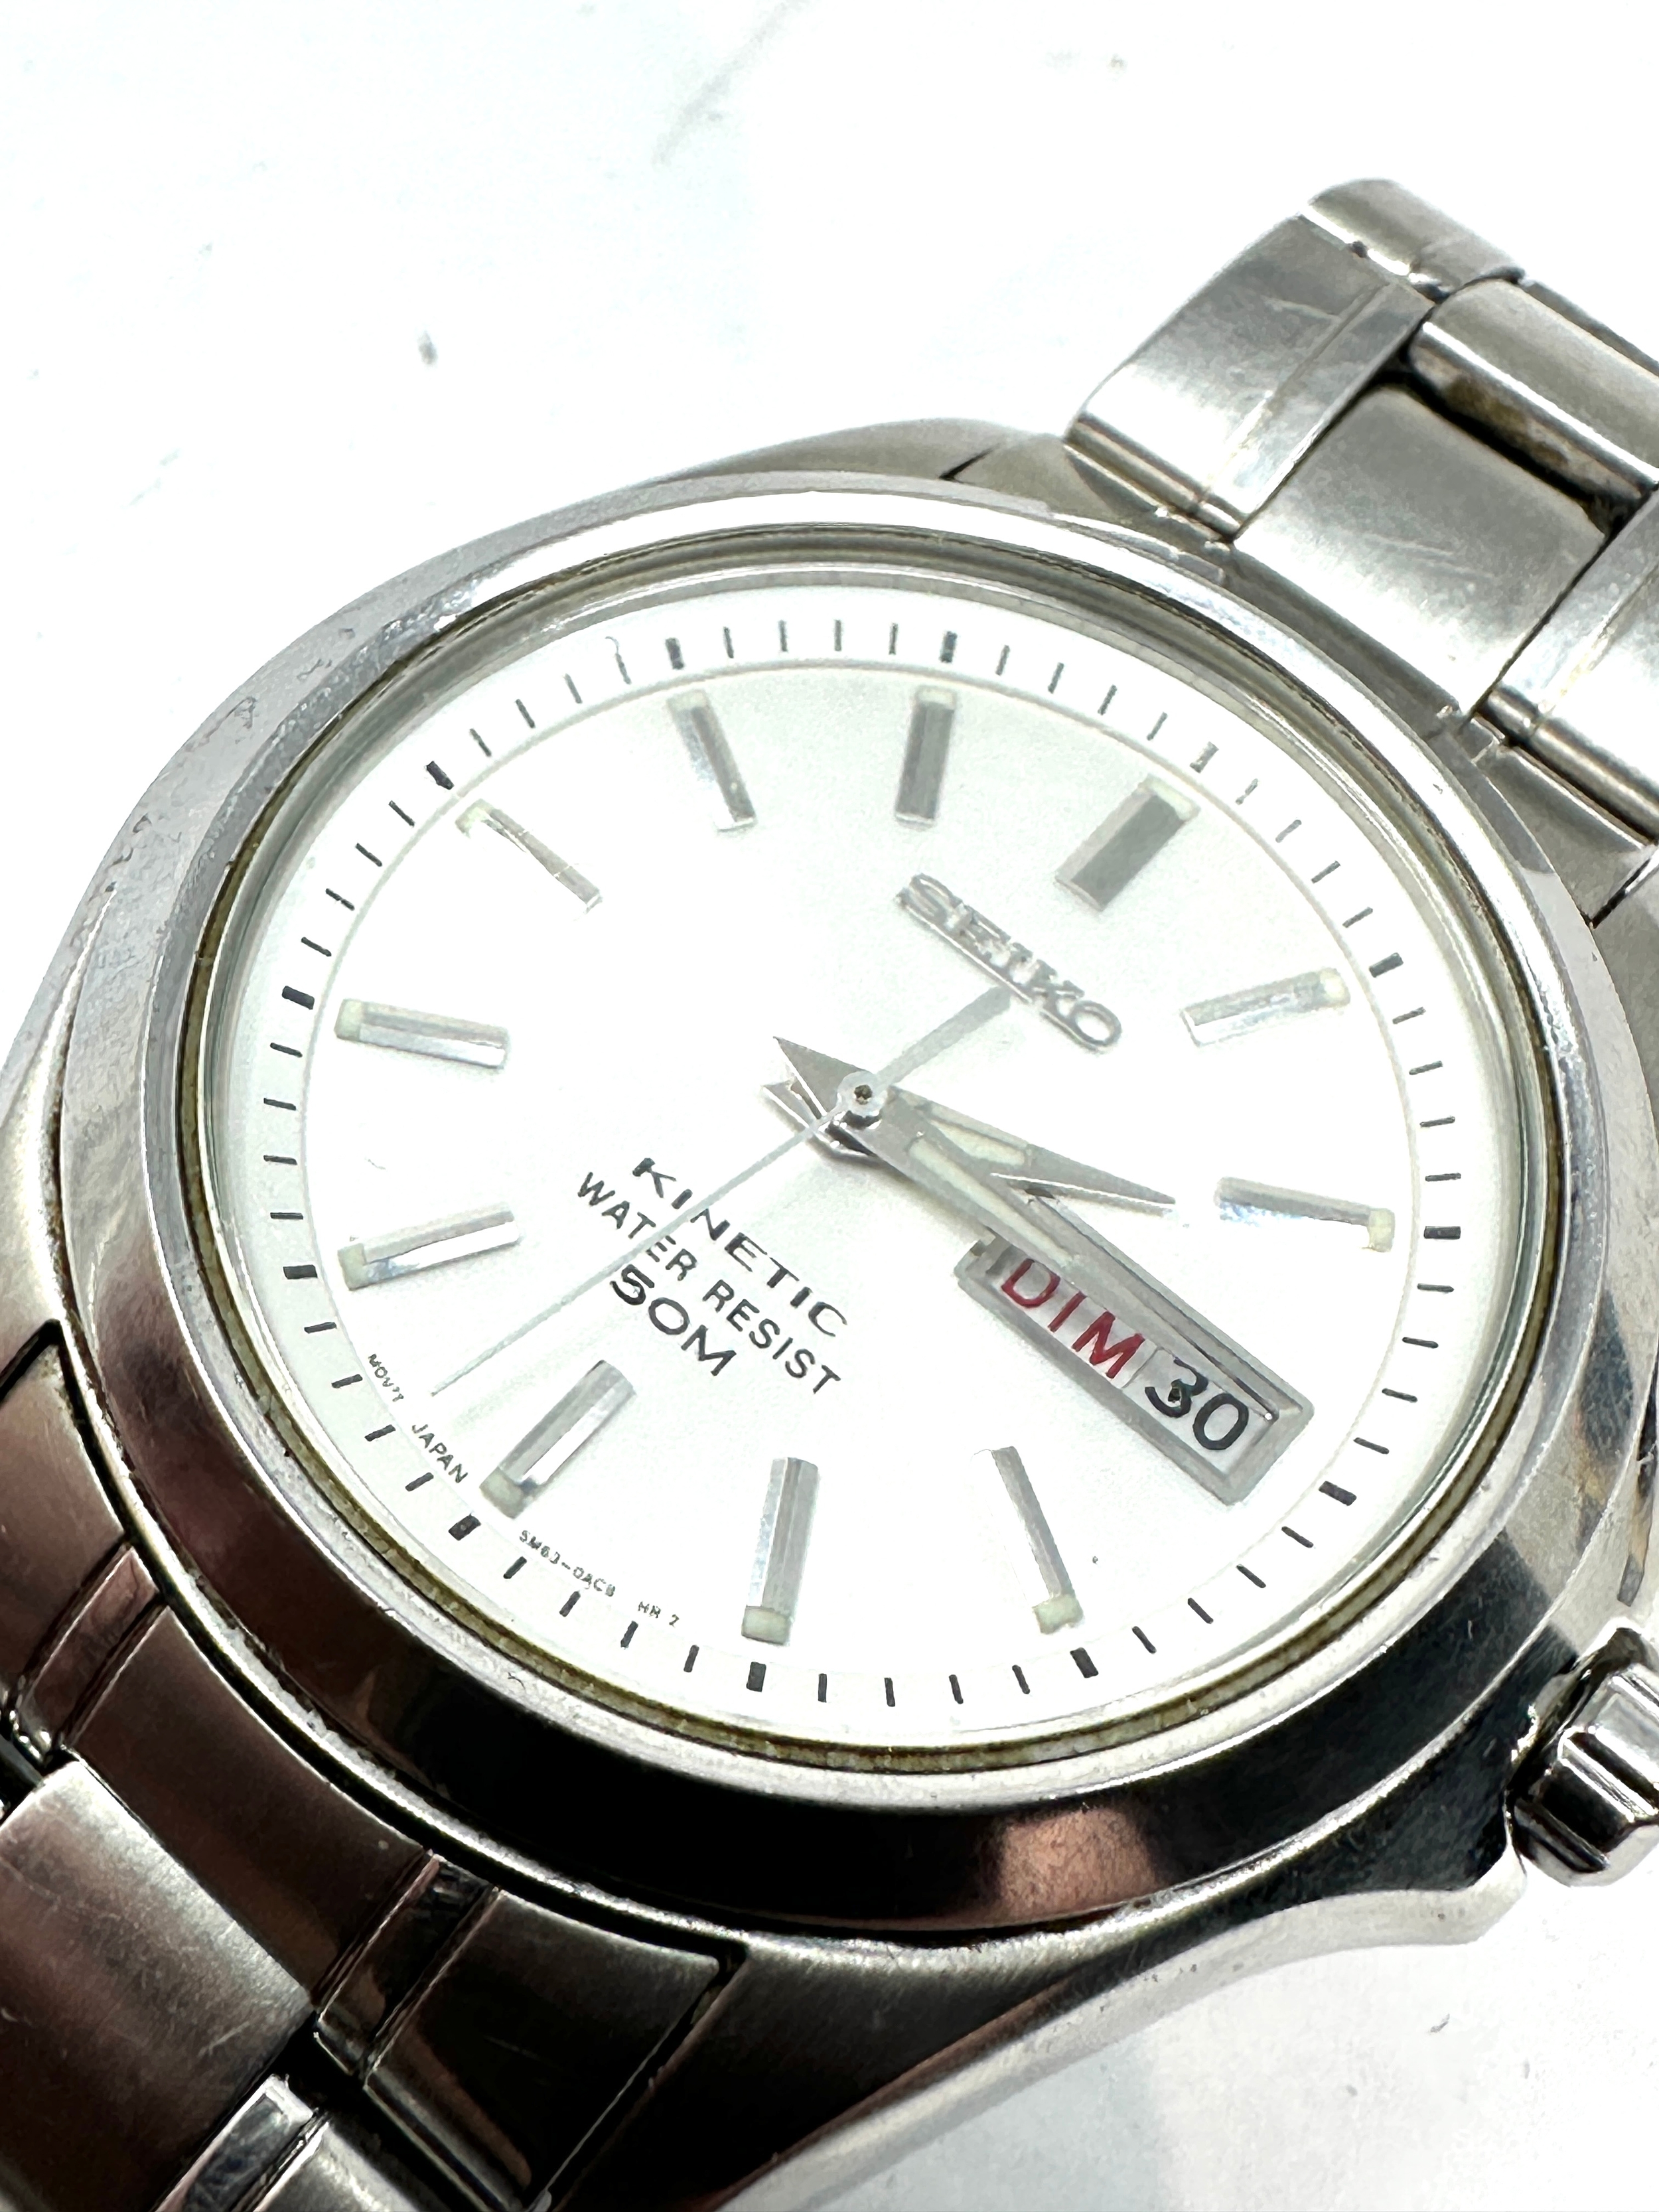 Gents Seiko Kinetic Watch 5M63-0B90 - 50m the watch is ticking - Image 3 of 6